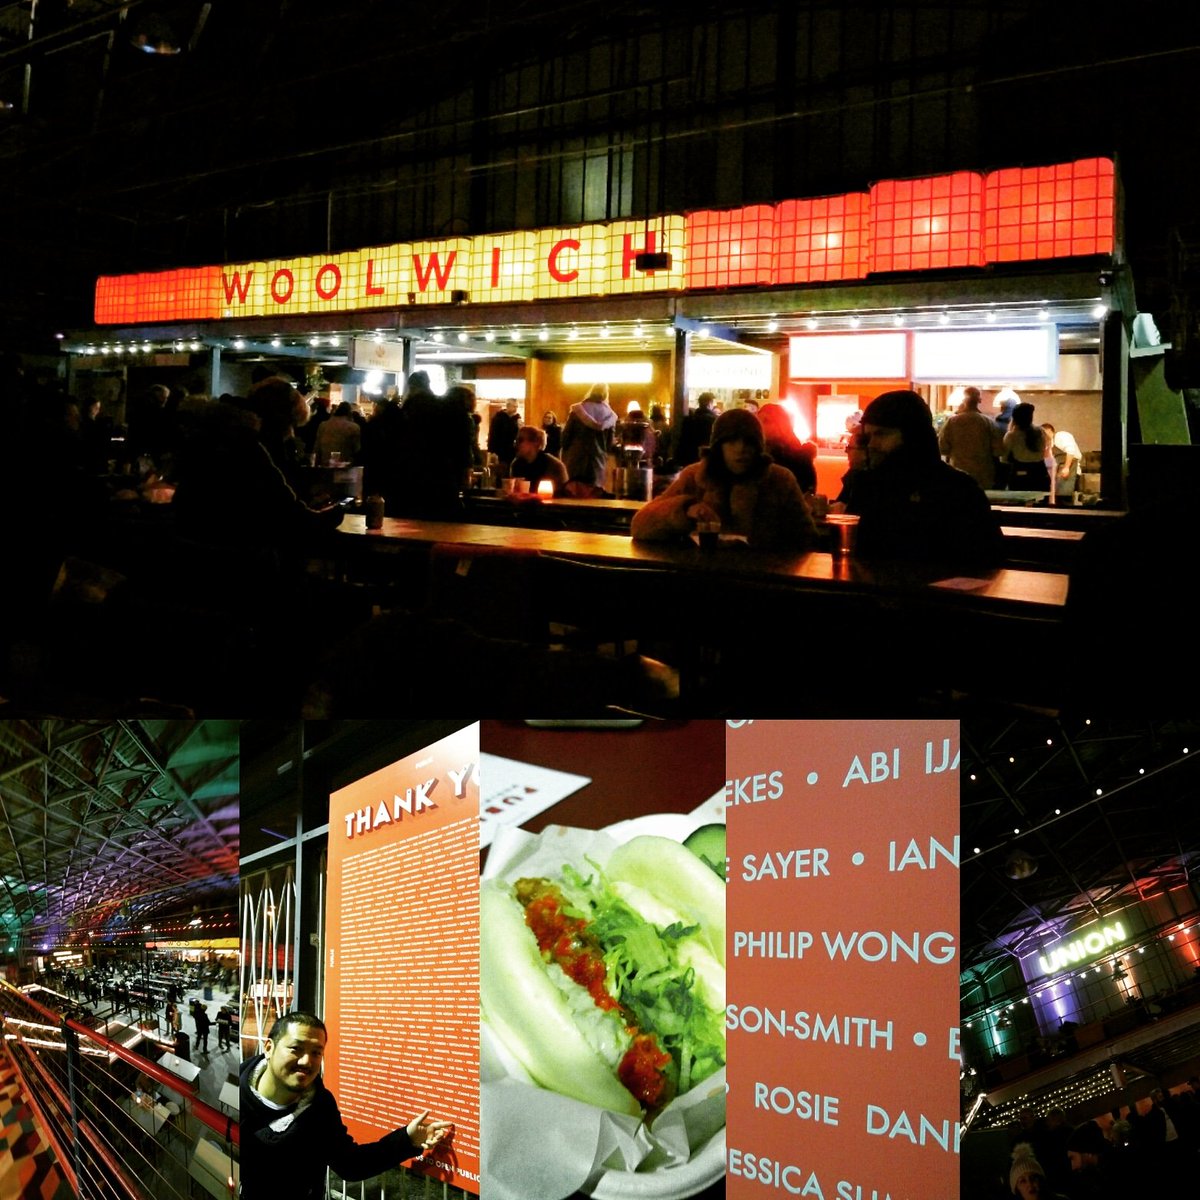 Amazing Launch Party of Street Feast Woolwich Public Market officially opens tonight! No #BeastFromTheEast
is stopping us! Thanks @DowneyJD & @StreetFeastLDN #madeitonthelist #thankyou #StreetFeast #WoolwichPublicMarket #Woolwich #Greenwich #London @Royal_Greenwich @RARE_explore